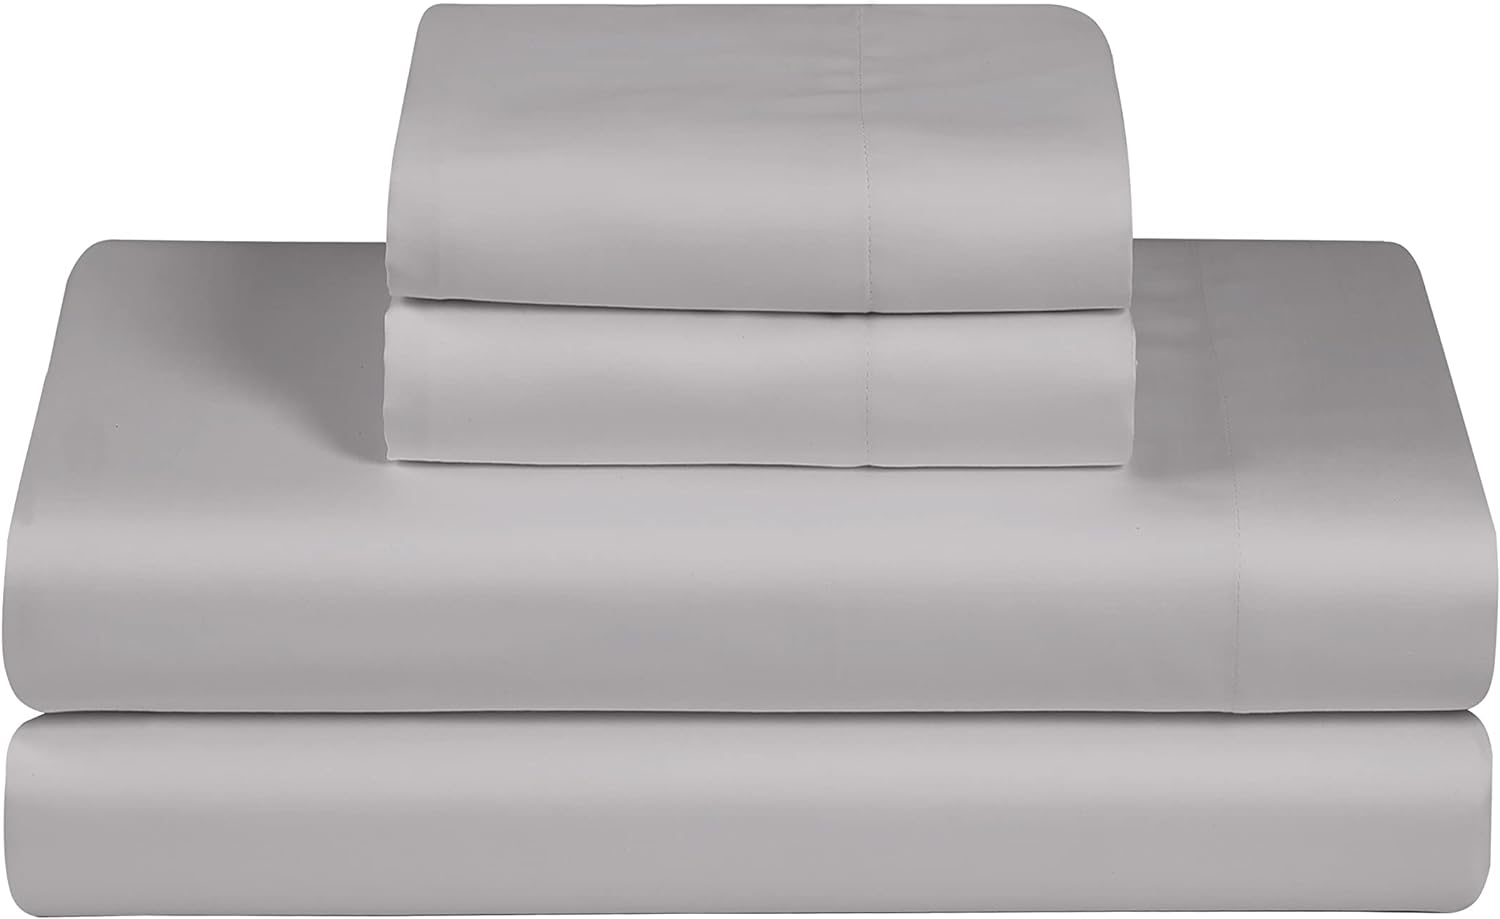 Feather & Stitch 100% Cotton King Size Sheet Set, 300 TC Breathable & Cooling Sheets, 4 Pc Percale Weave Bedding Set, 16 Deep Pocket - Hotel Premium Soft Bedding Set (King, Grey)